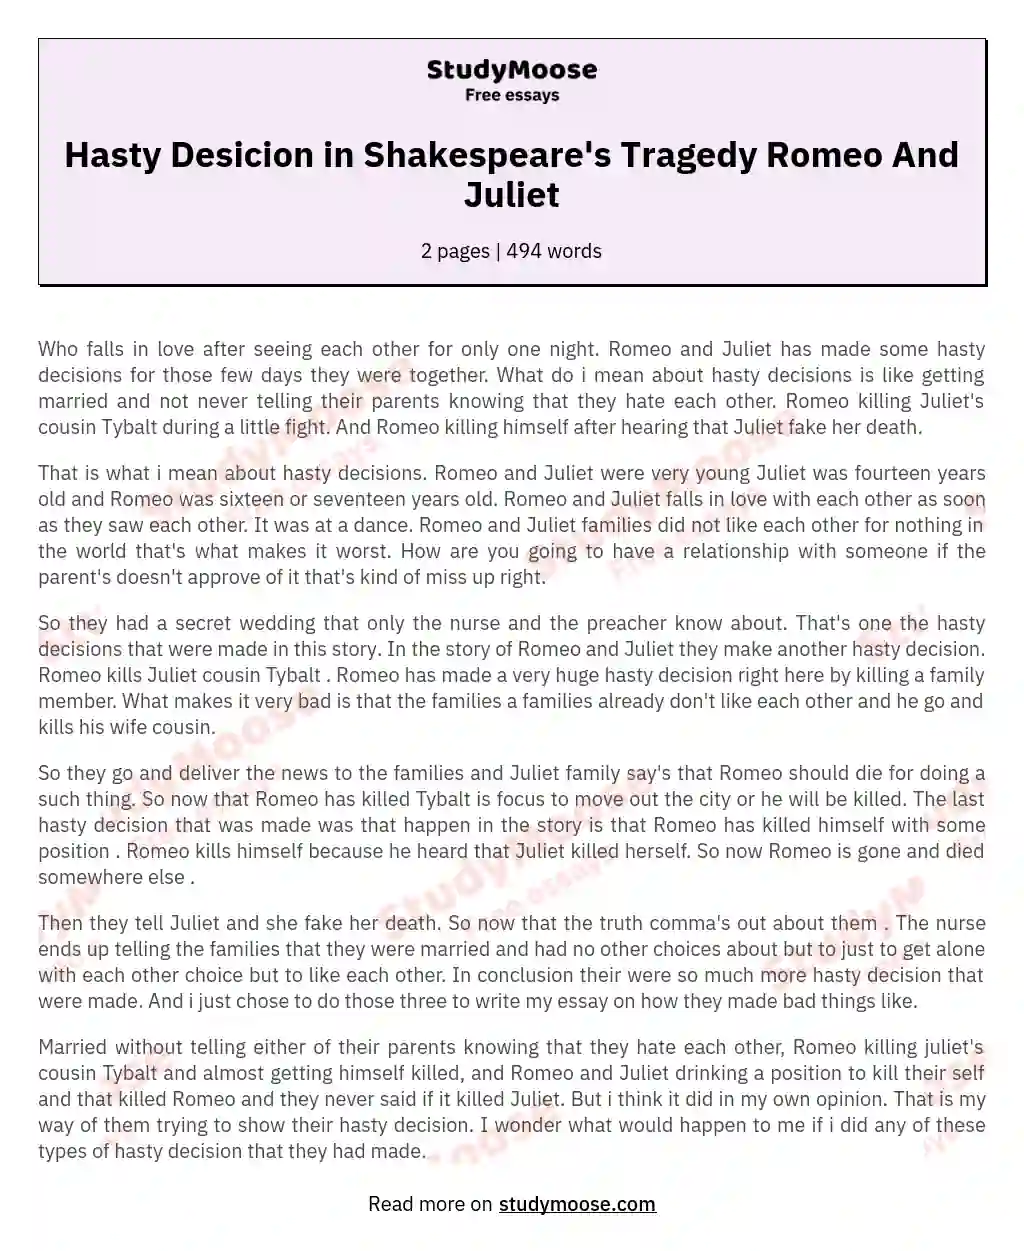 Hasty Desicion in Shakespeare's Tragedy Romeo And Juliet essay